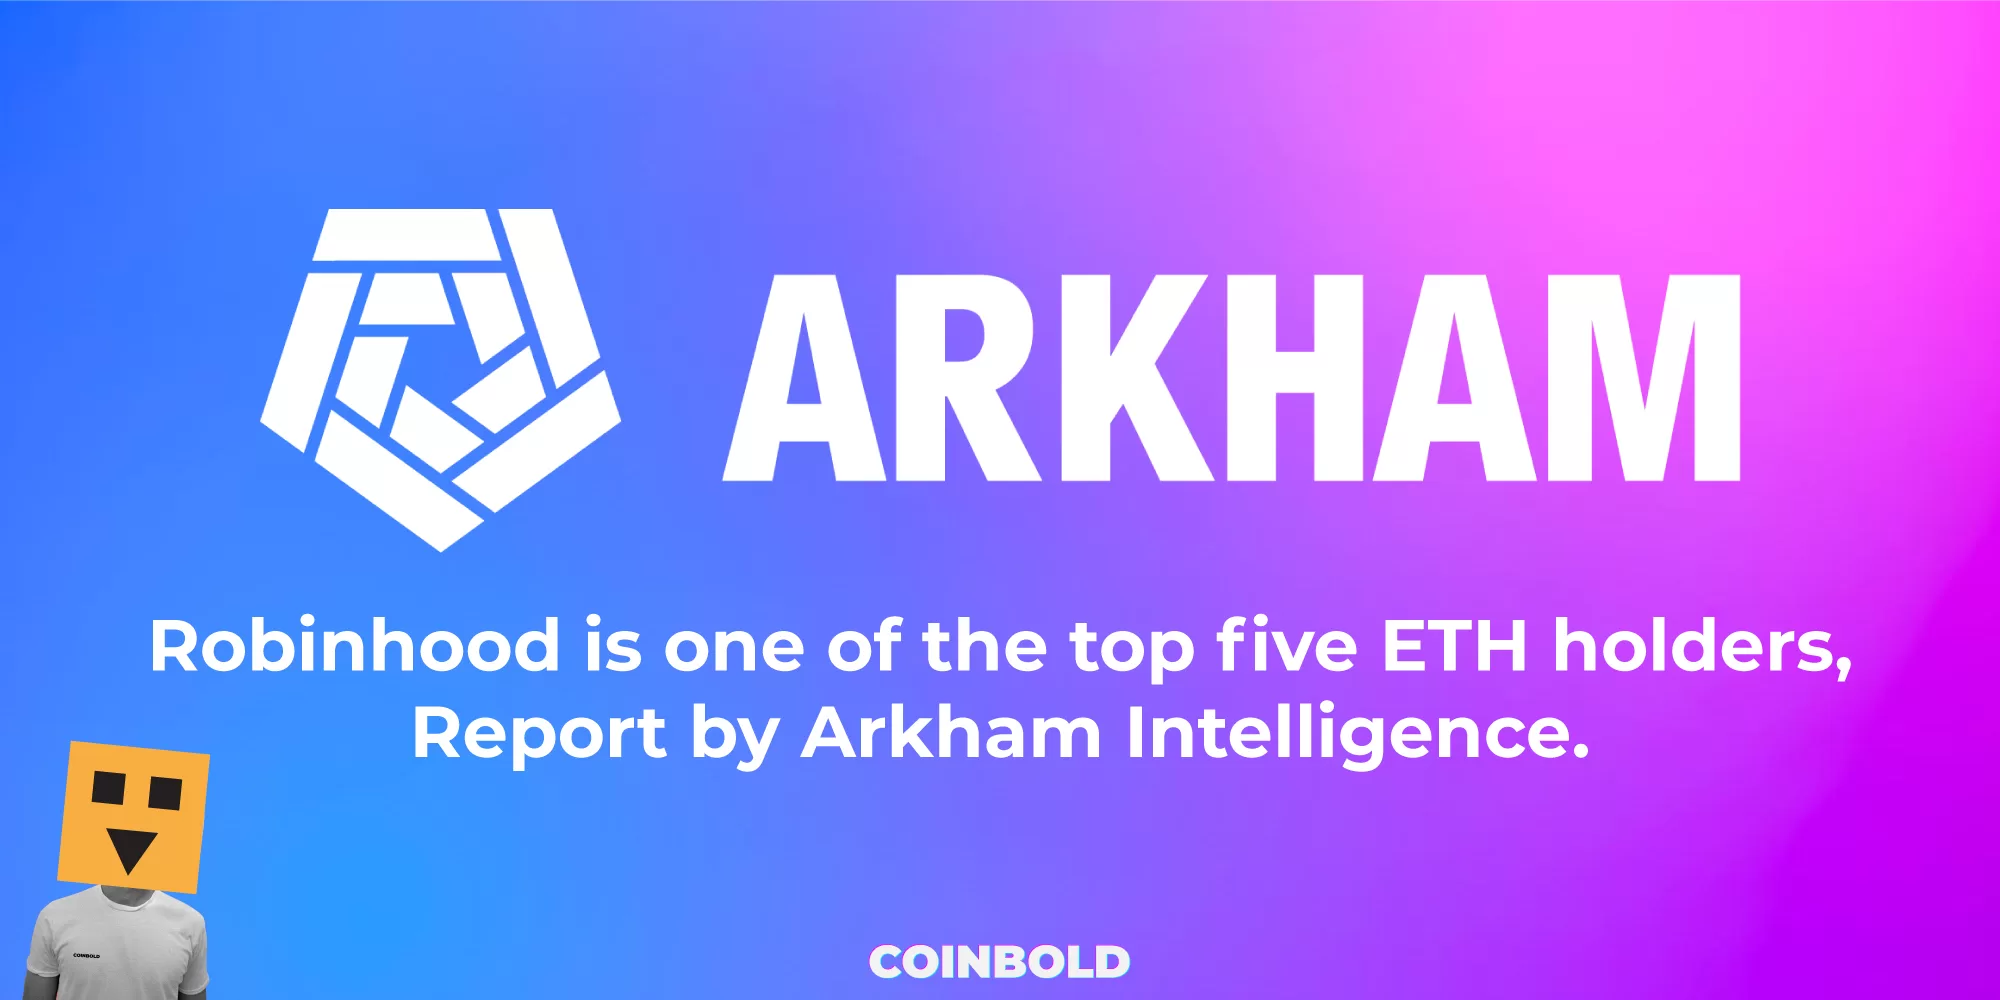 Robinhood is one of the top five ETH holders, Report by Arkham Intelligence.